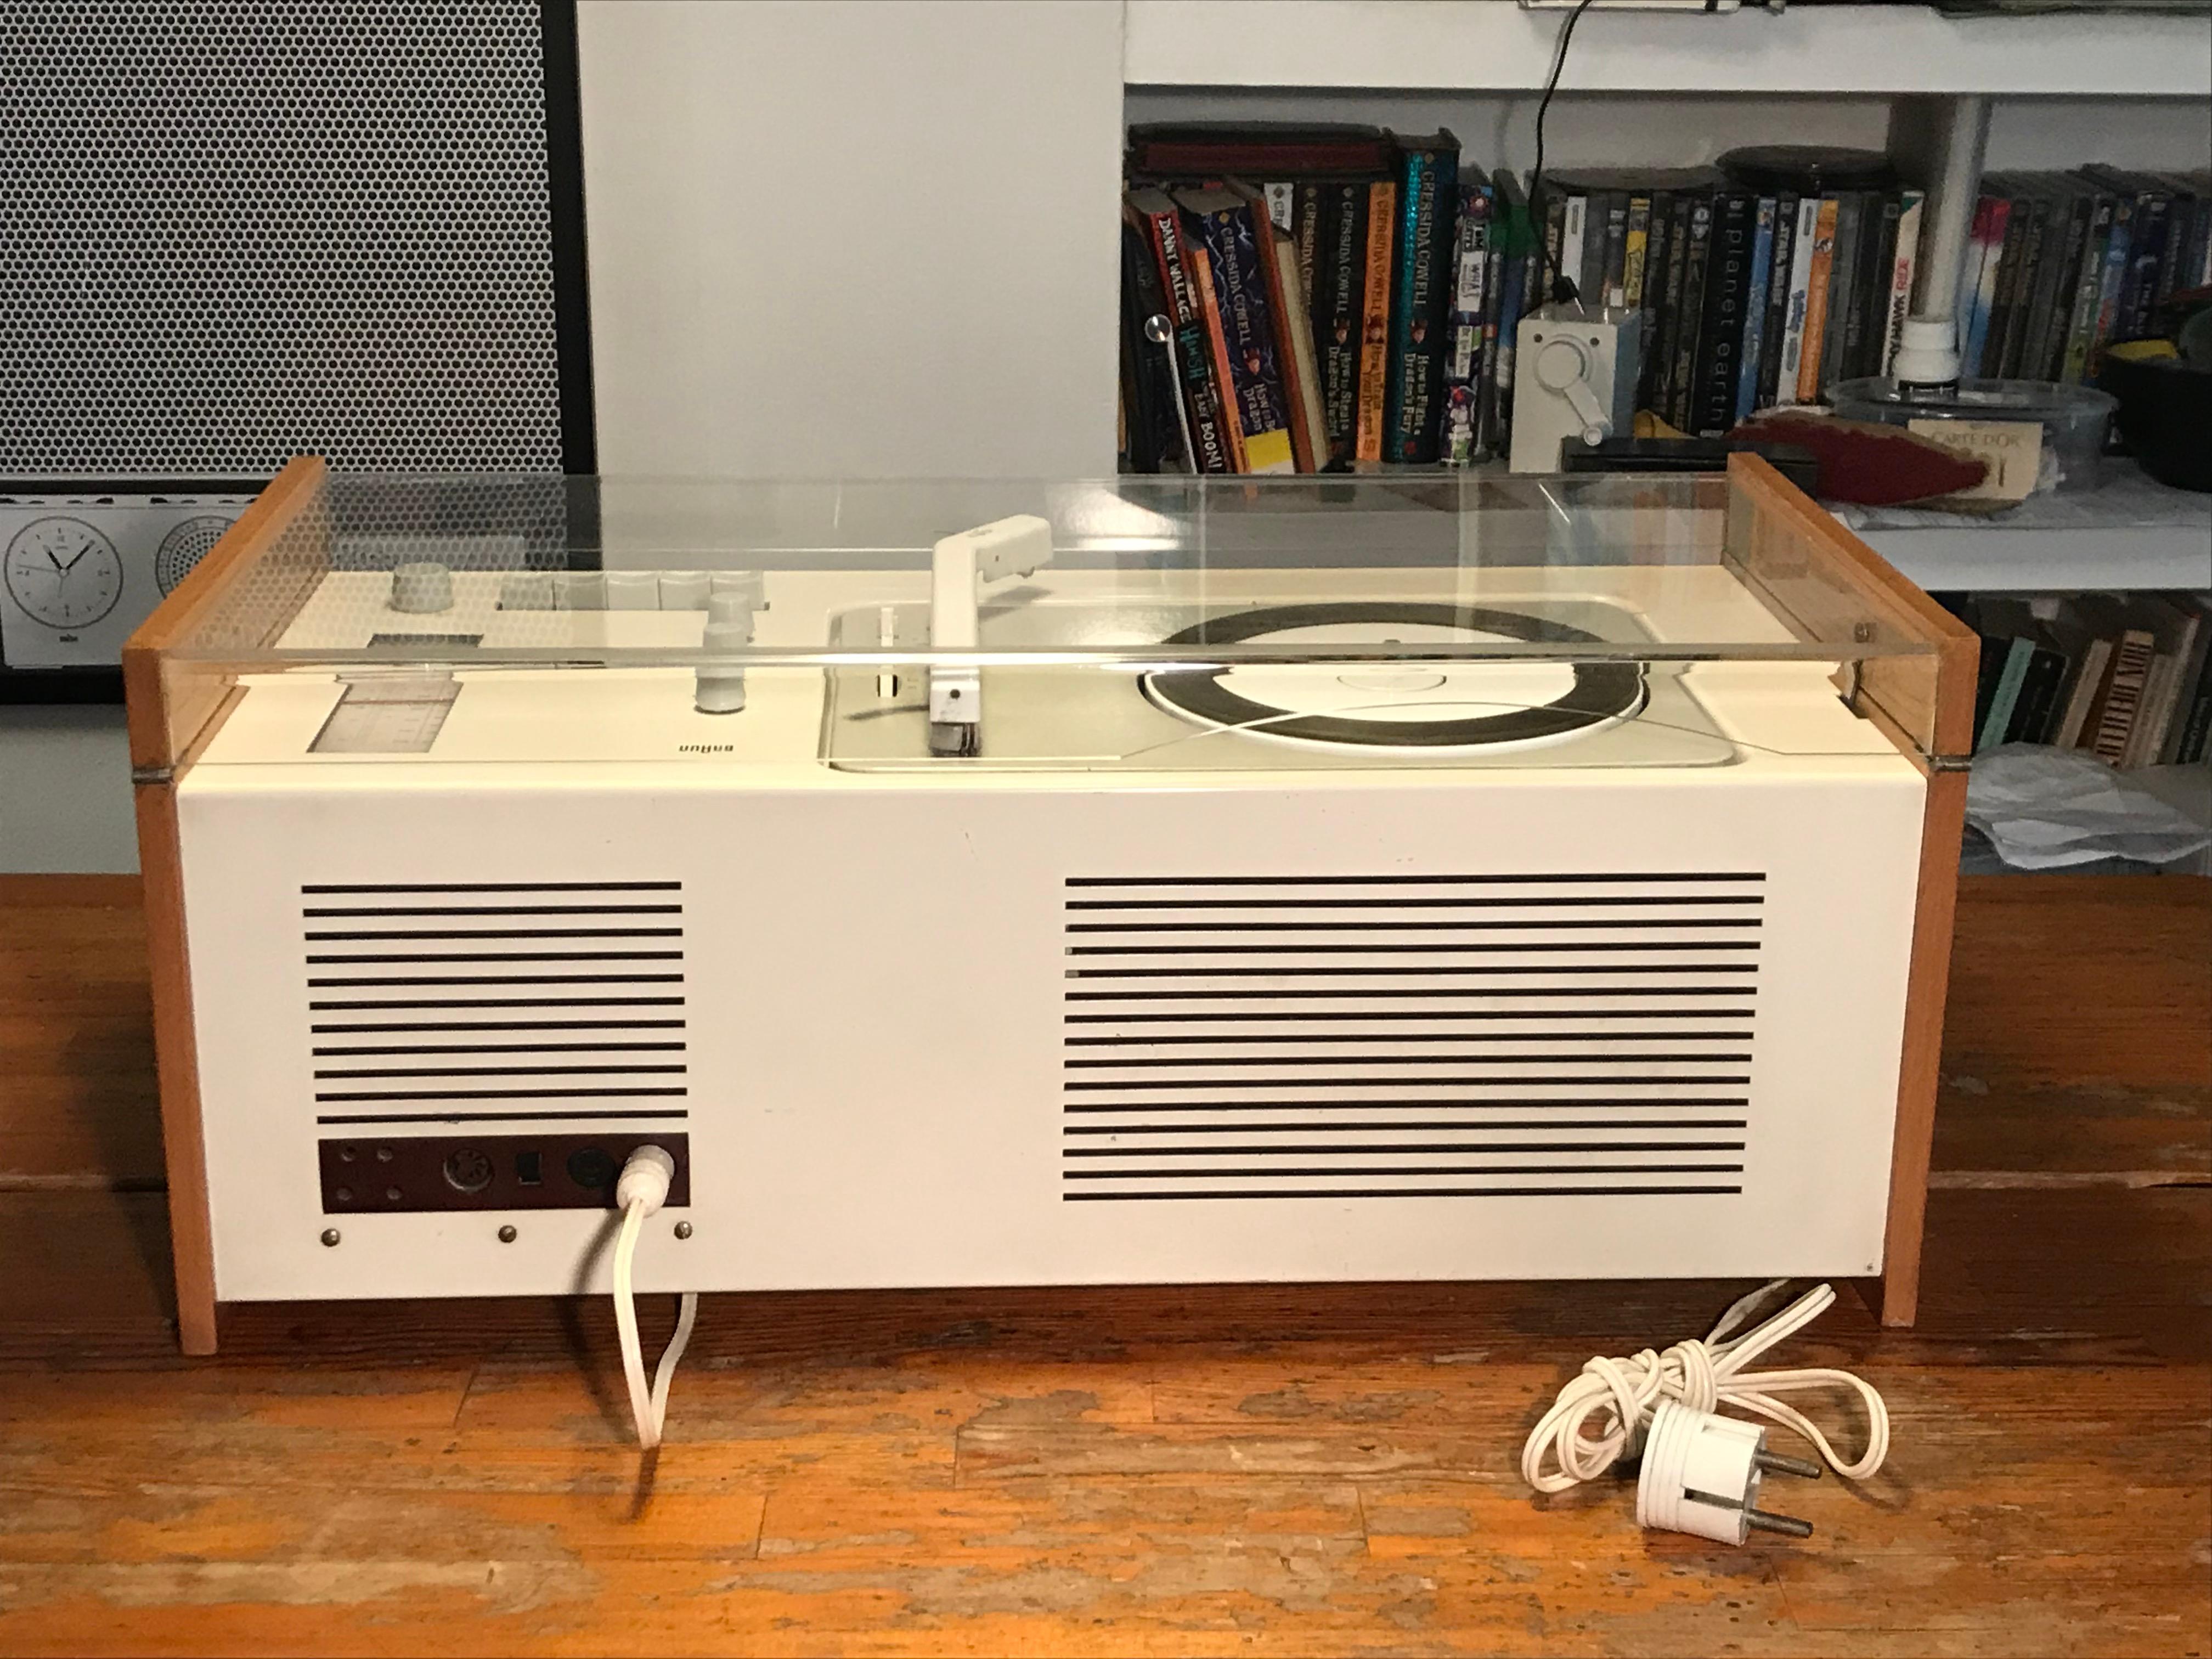 German SK61 Record Player Designed by Dieter Rams for Braun, 1966